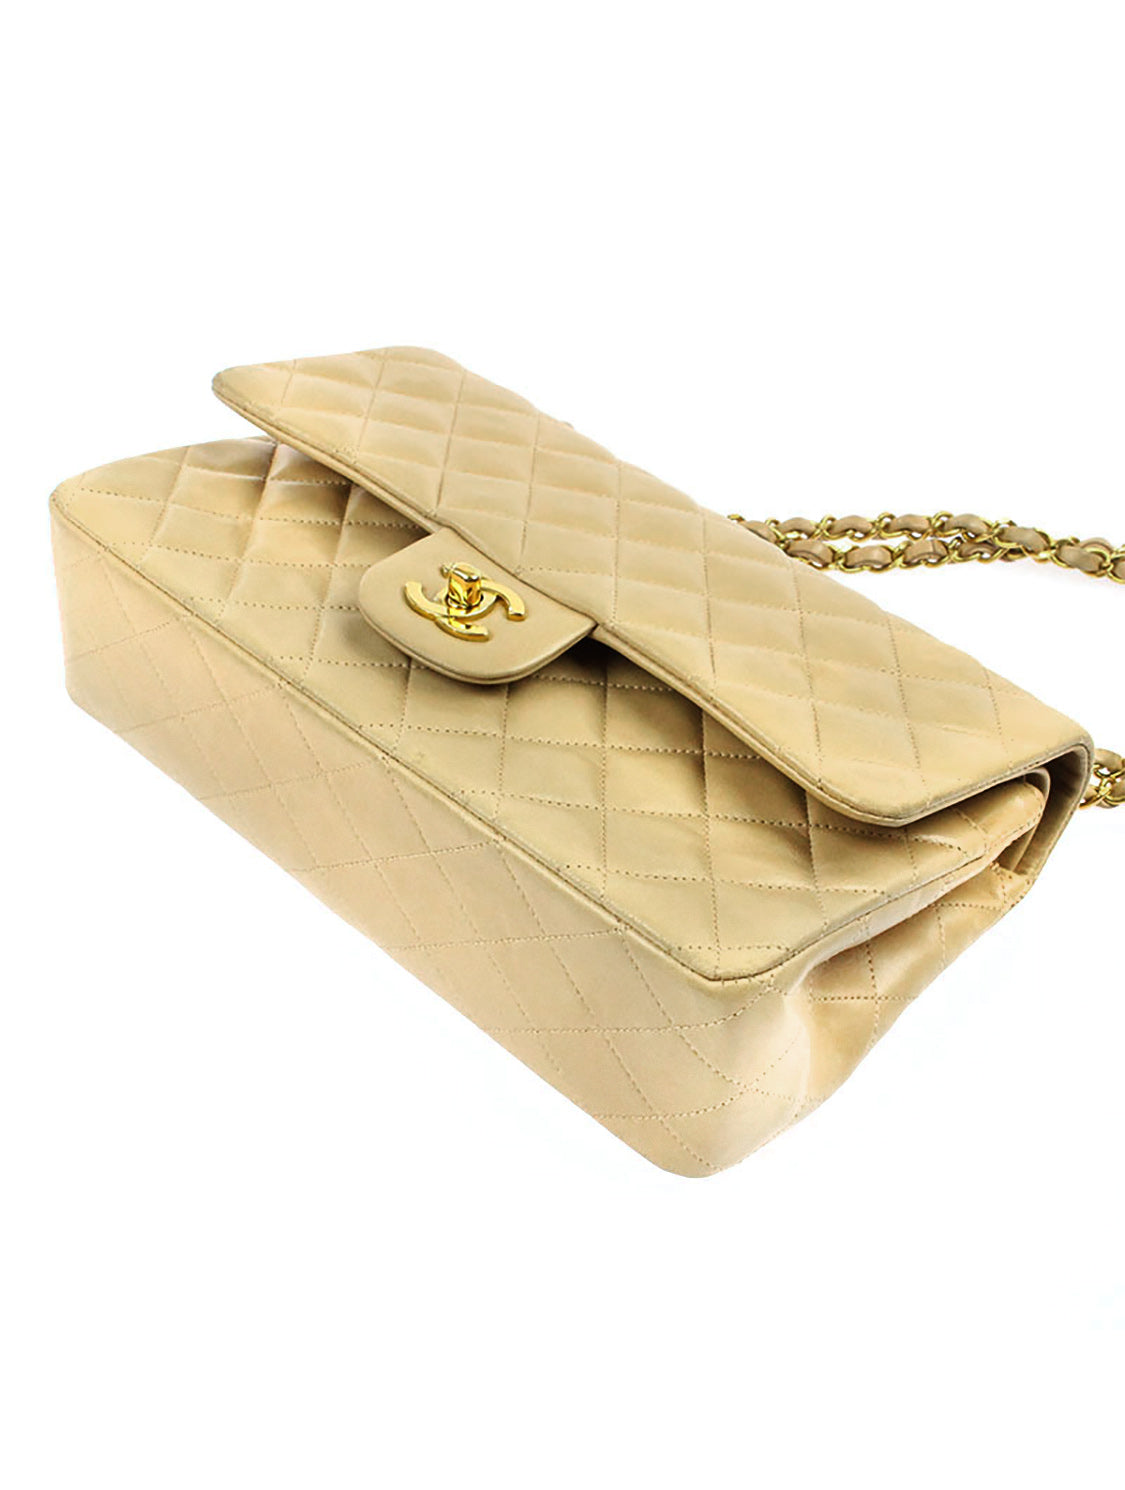 Chanel Vintage Clear Quilted Vinyl And Black Patent Leather Maxi Flap Bag  Gold Hardware, 1994-1996 Available For Immediate Sale At Sotheby's